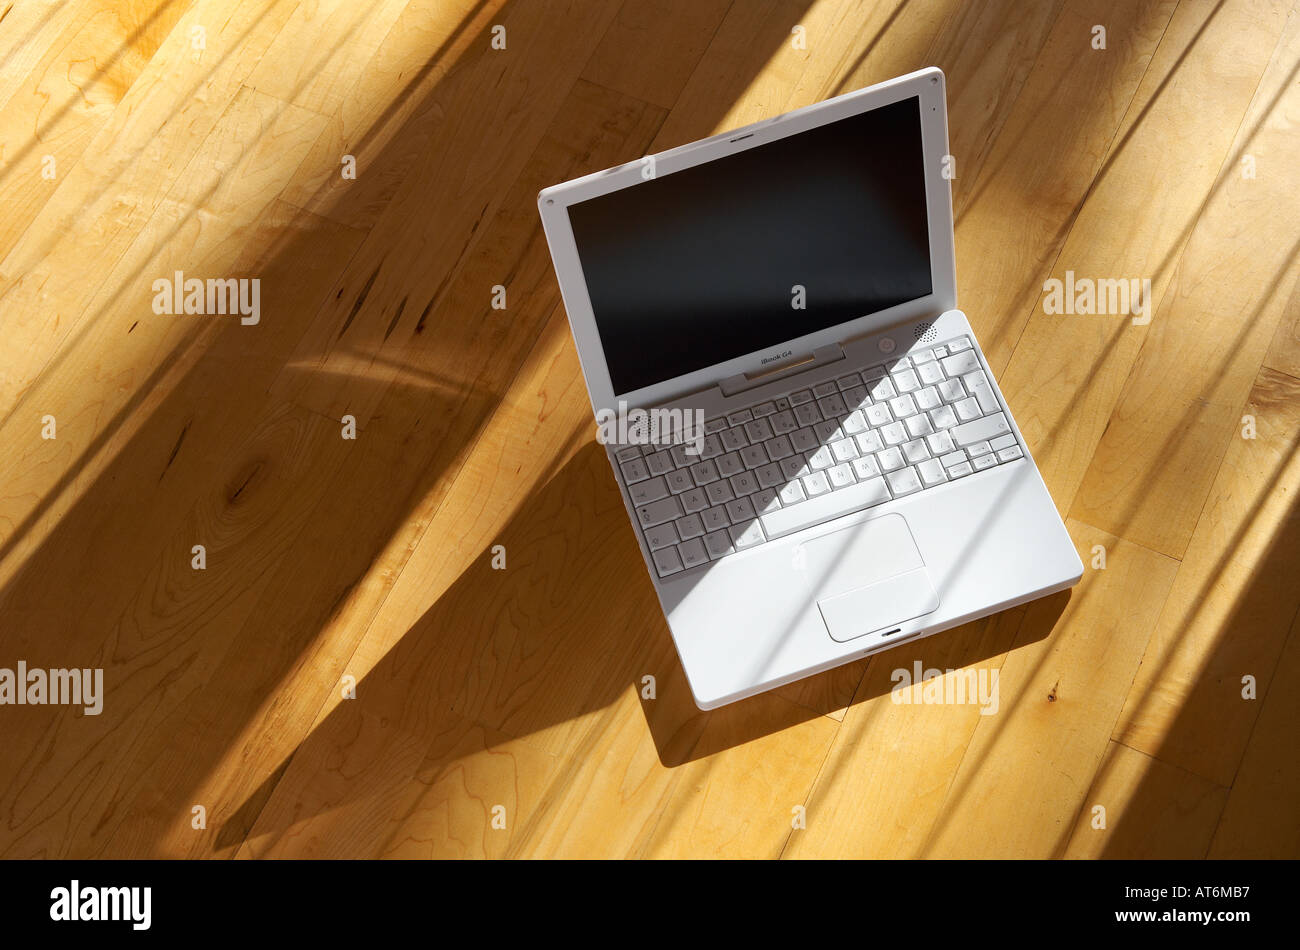 Apple Ibook G4 laptop computer sitting on a real wooden floor in the afternoon sunshine Stock Photo